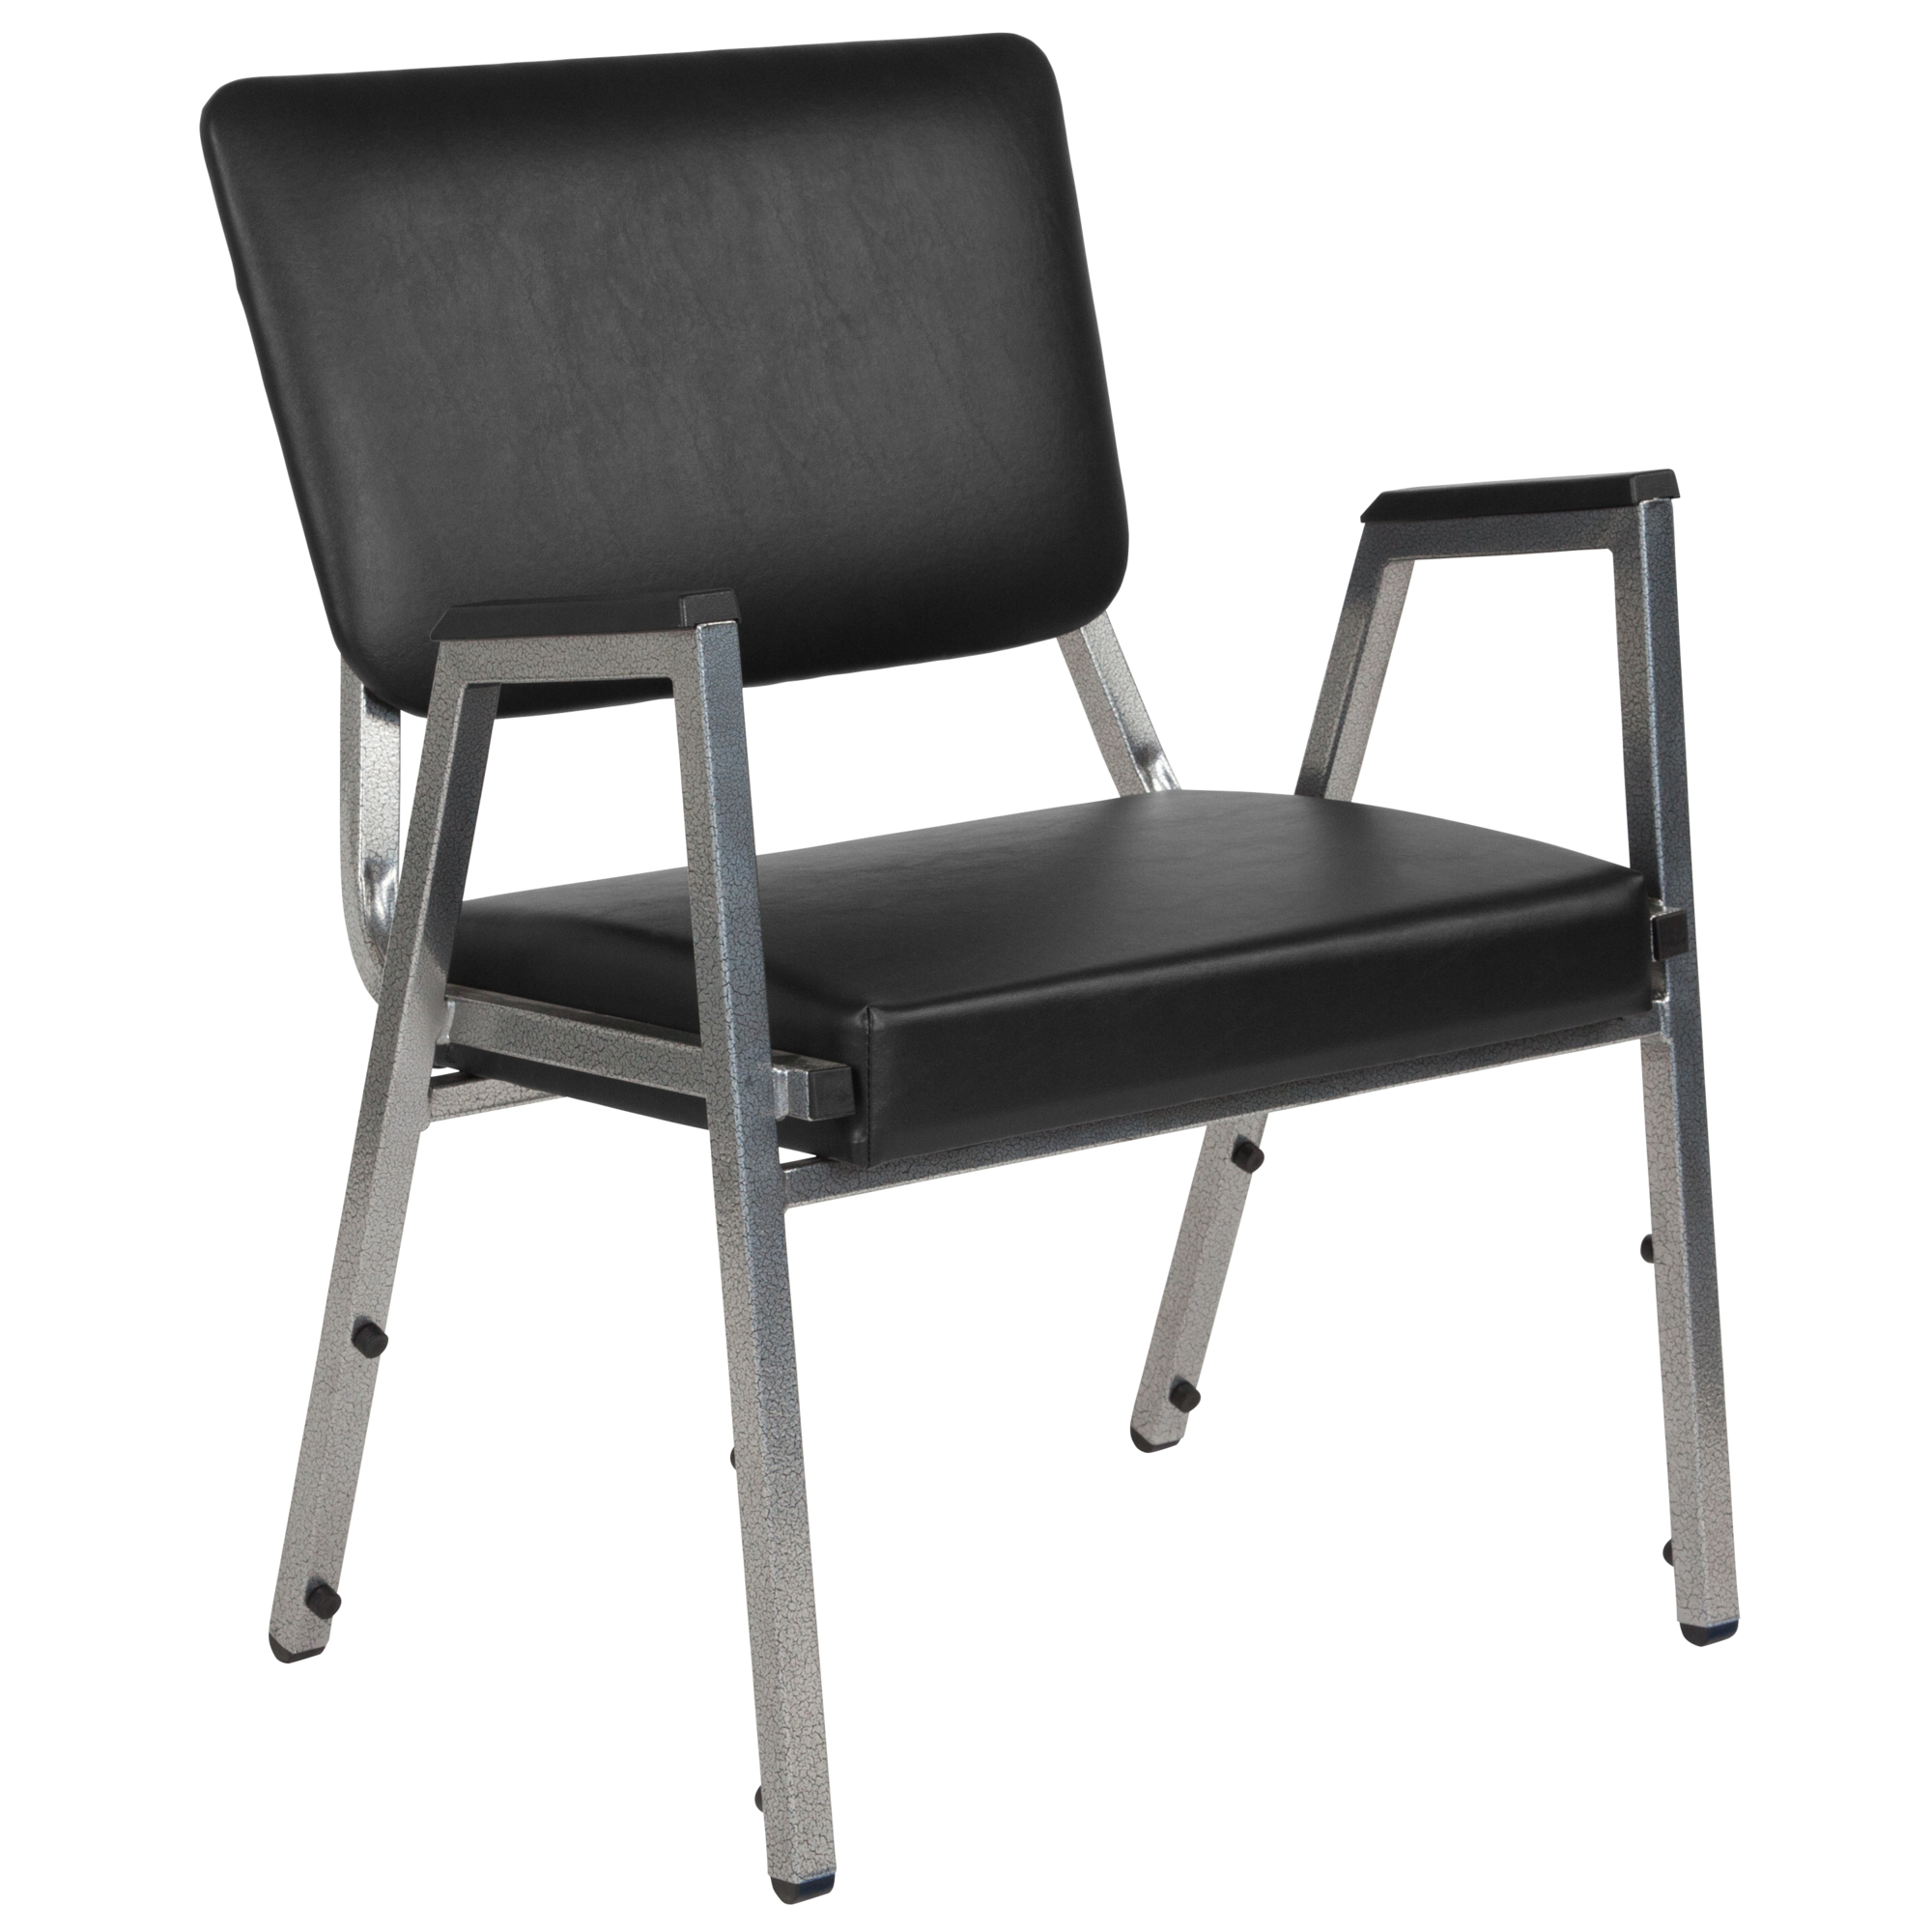 Flash Furniture, 1000 lb. Rated Black Vinyl Bariatric Arm Chair, Primary Color Black, Included (qty.) 1, Model XUDG604436702BV